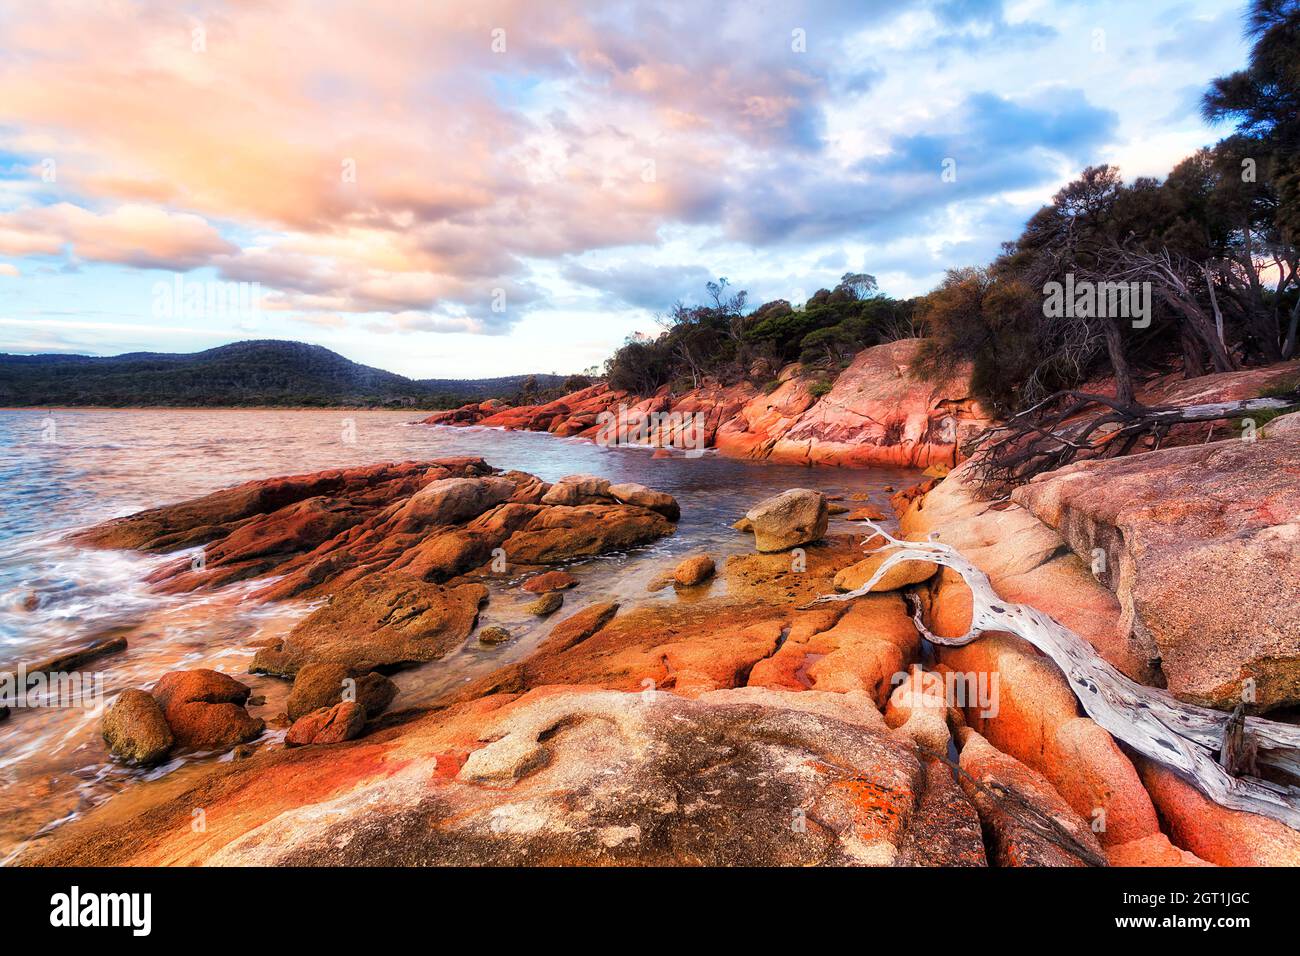 Colourful granite boulder rocks covered by lichen in Honeymoon bay of Freycinet national park and peninsula in Tasmania. Stock Photo